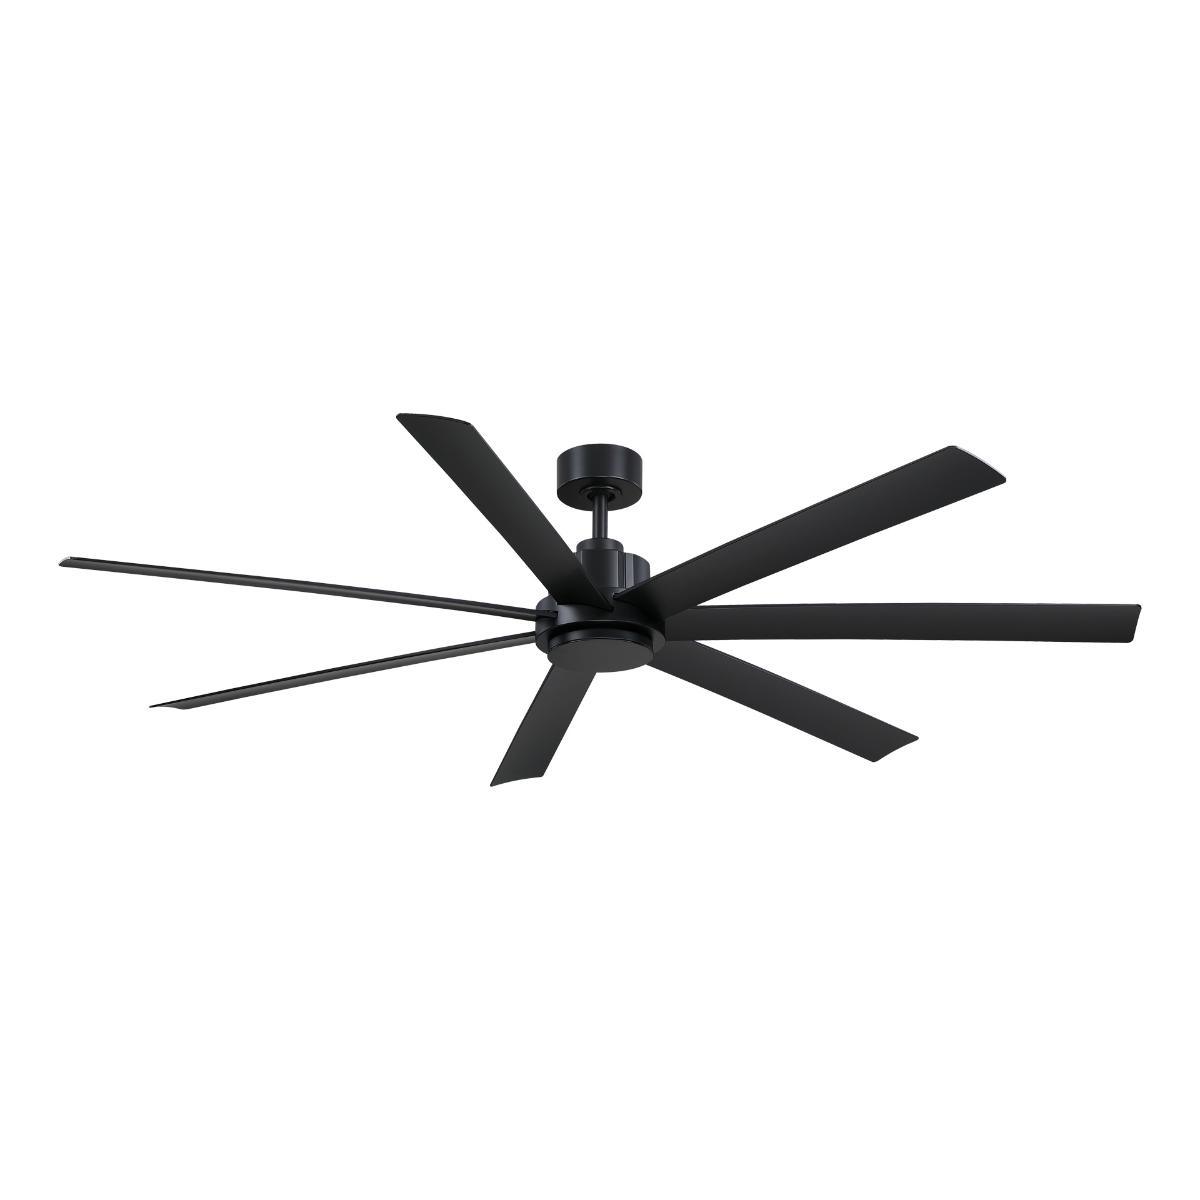 Pendry 72 inch Indoor/Outdoor Ceiling Fan with Remote, Black Finish - Bees Lighting